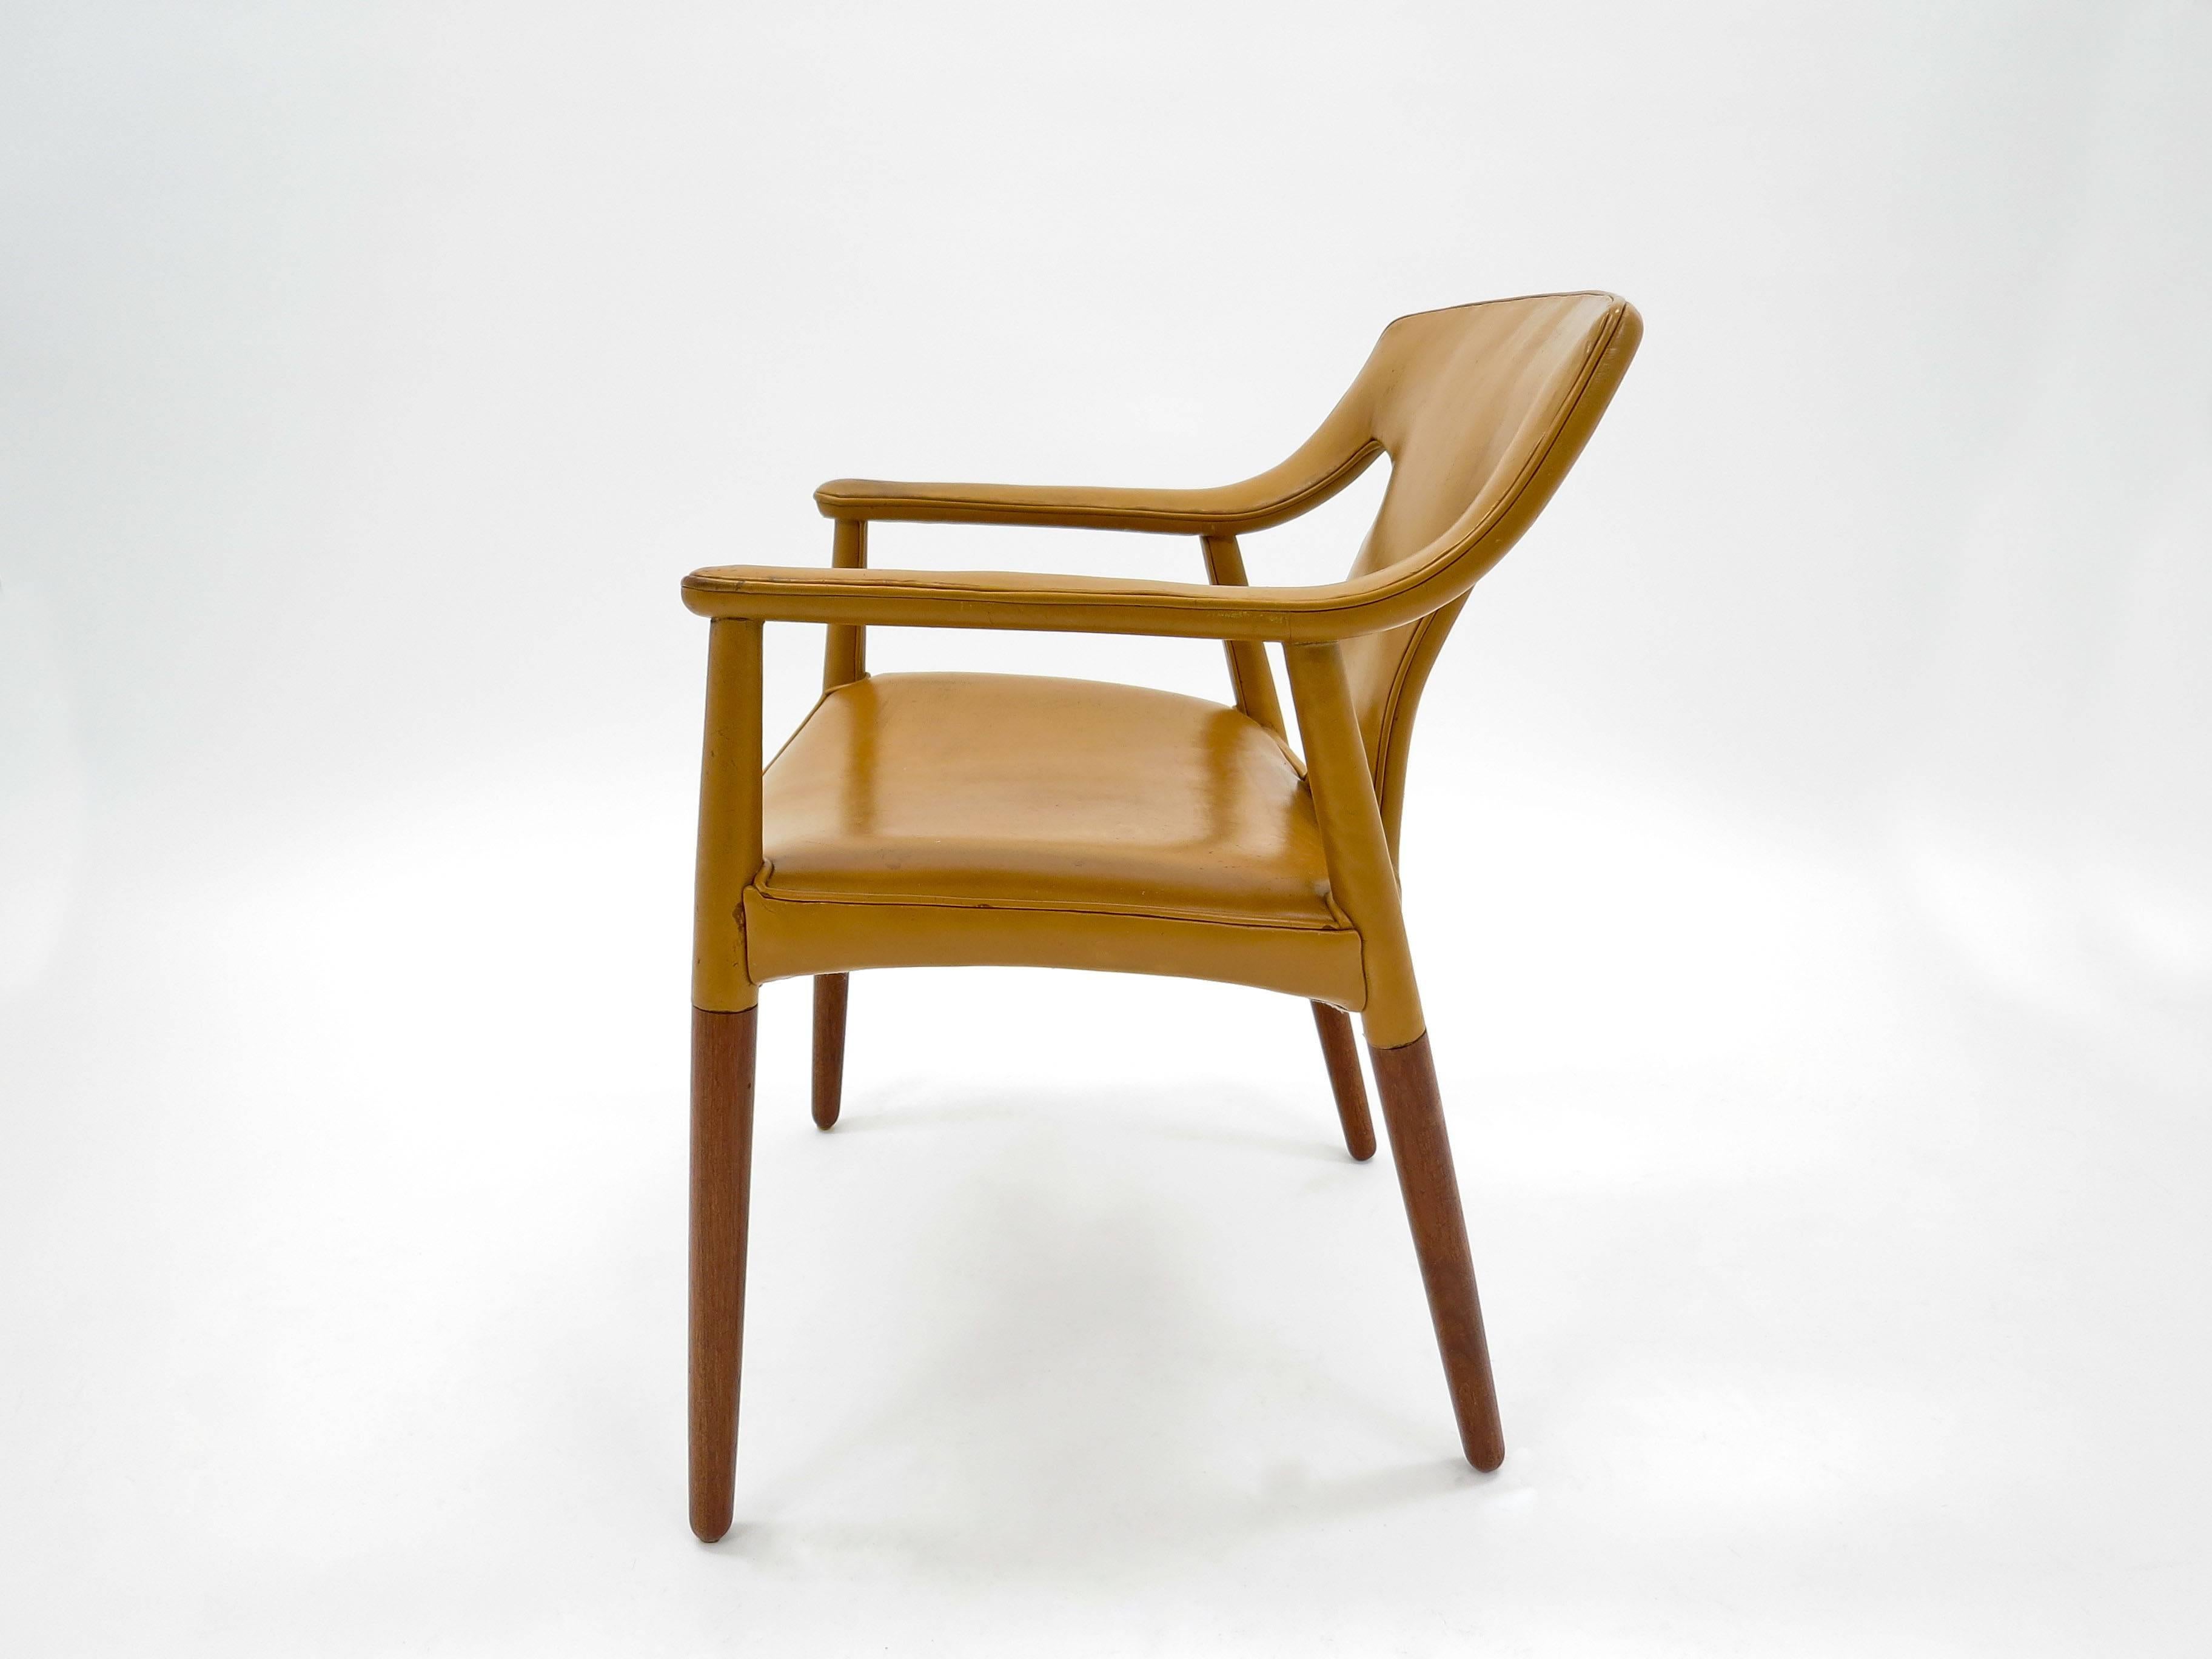 Bender Madsen and Larsen Armchair Leather and Teak, Danish, 1950s In Good Condition For Sale In London, GB